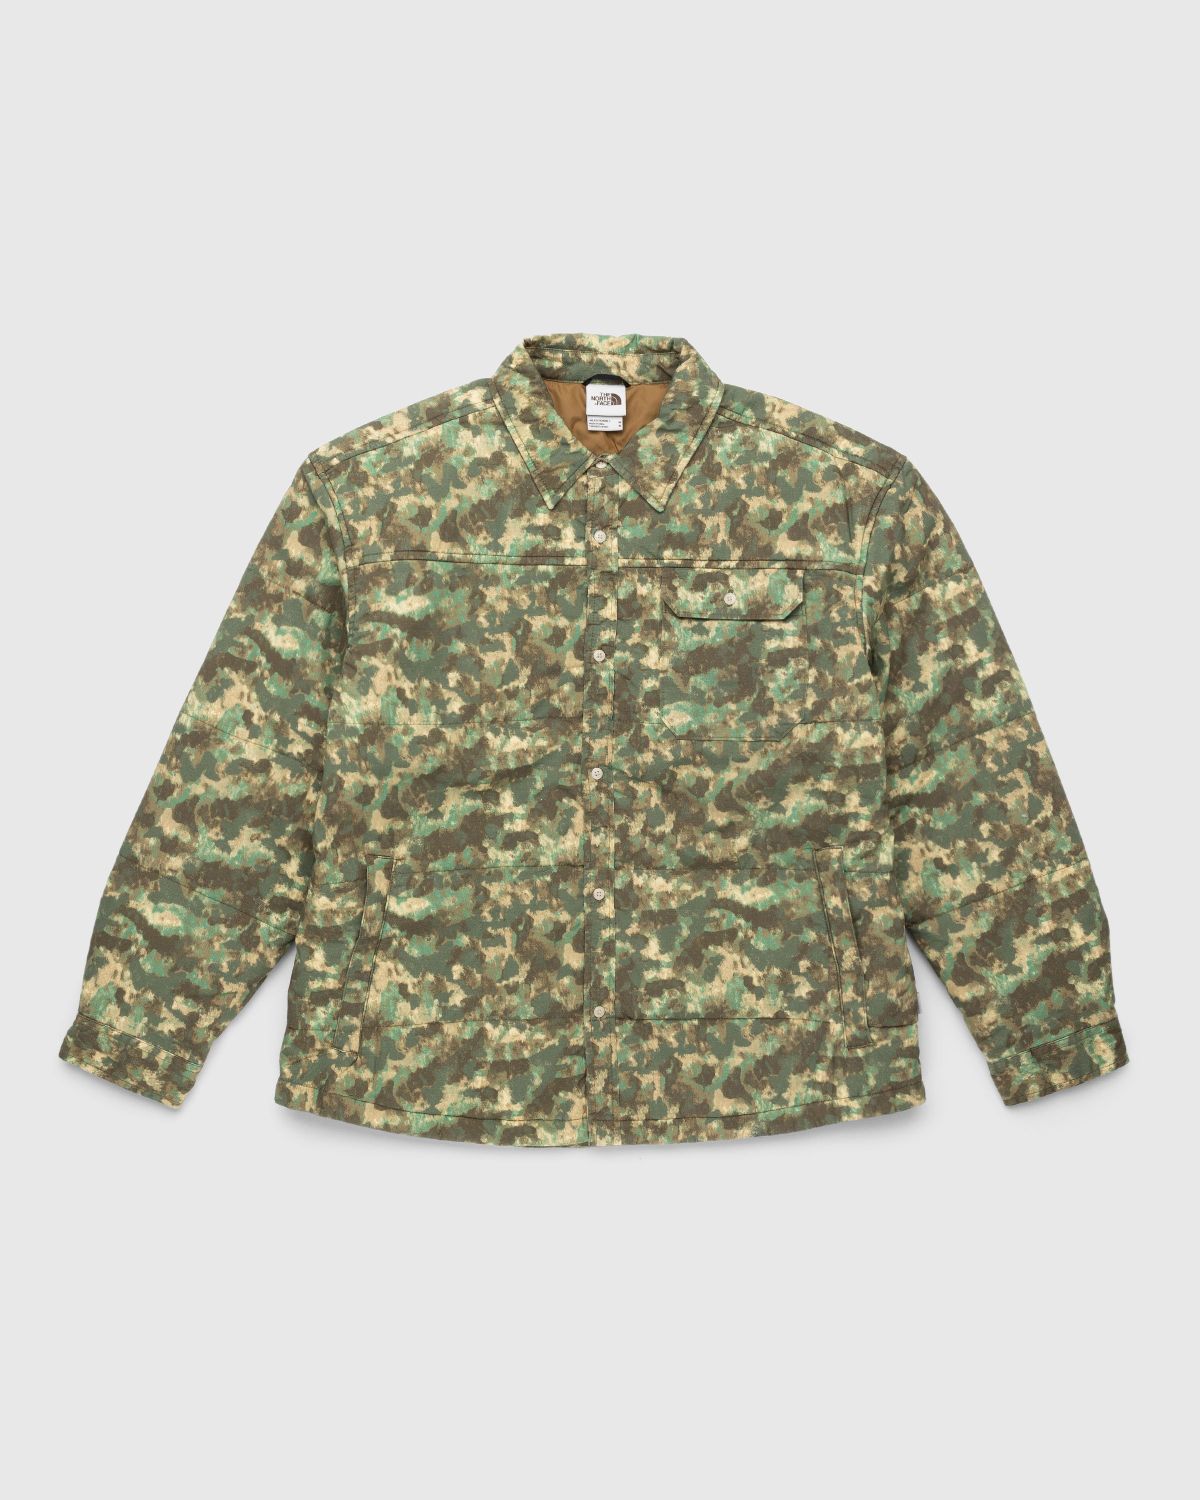 The North Face – M66 Utility Rain Jacket Military Olive/Stippled Camo ...